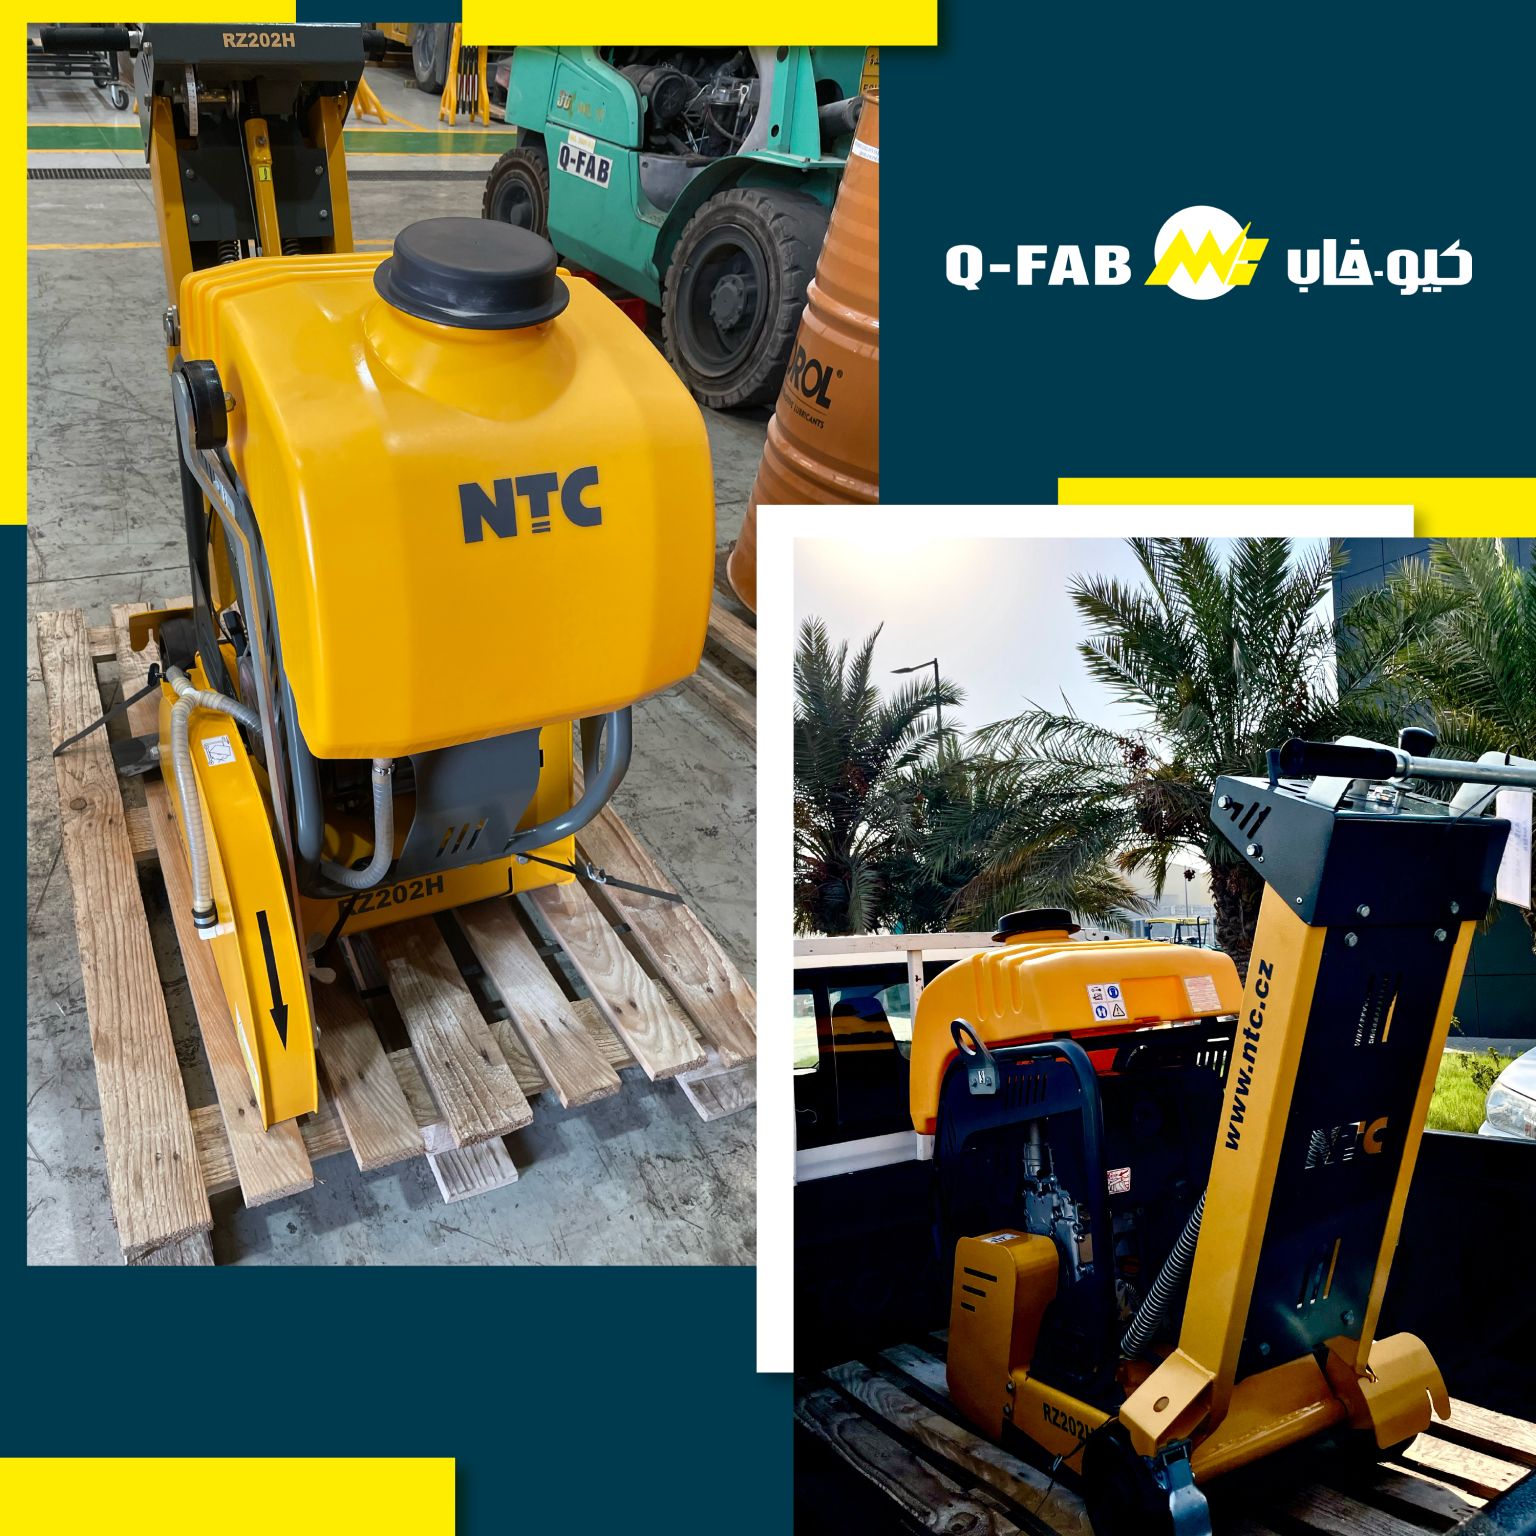 NTC Asphalt Cutter - Conquer Tough Cuts with Ease